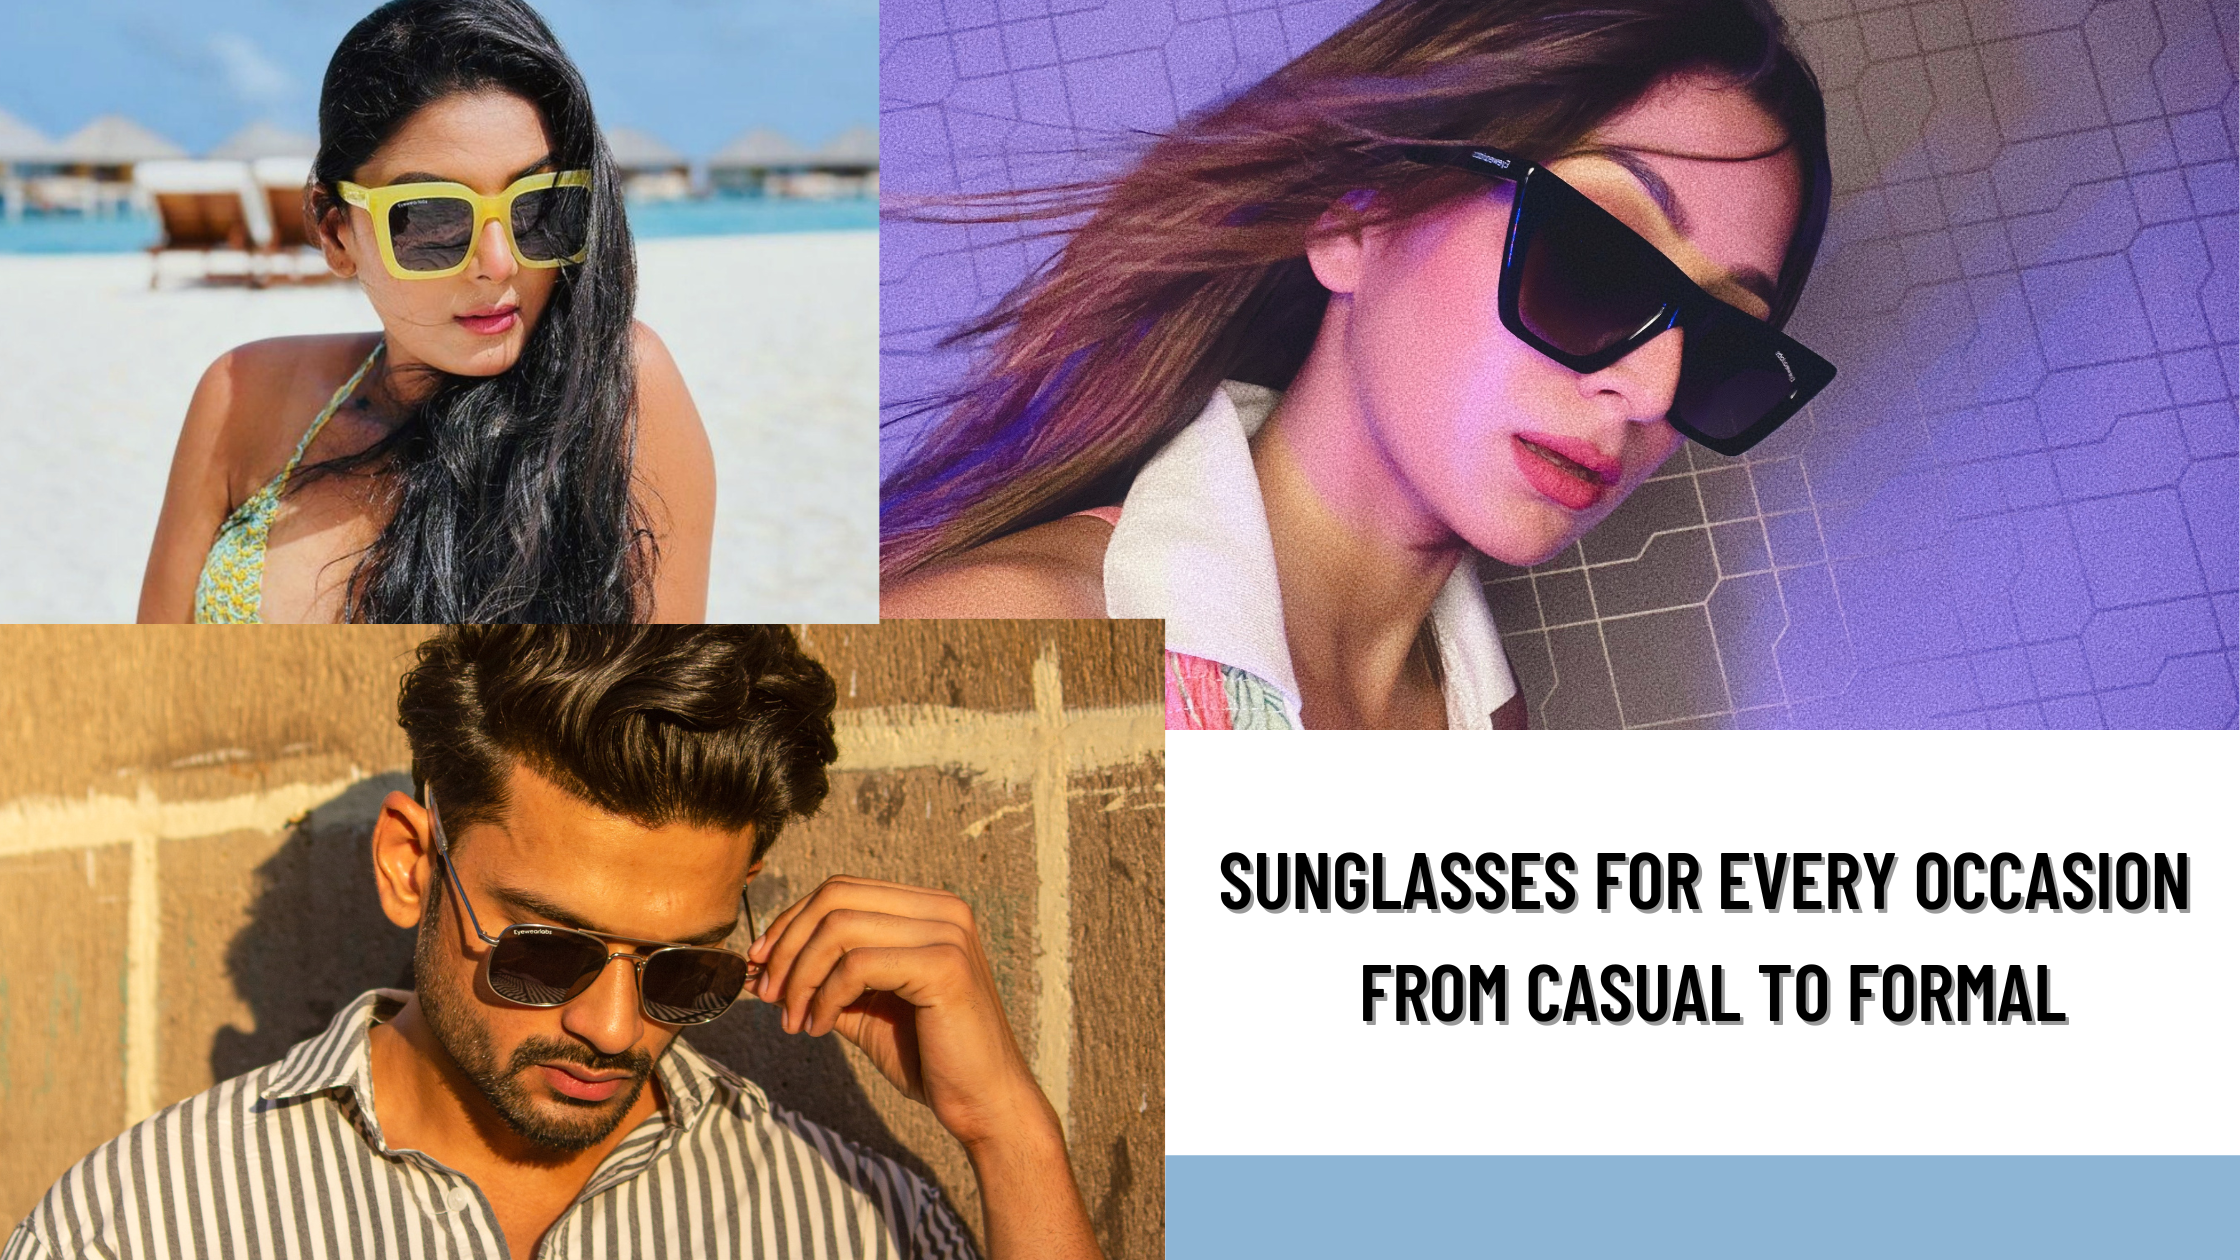 Sunglasses for Every Occasion From Casual to Formal